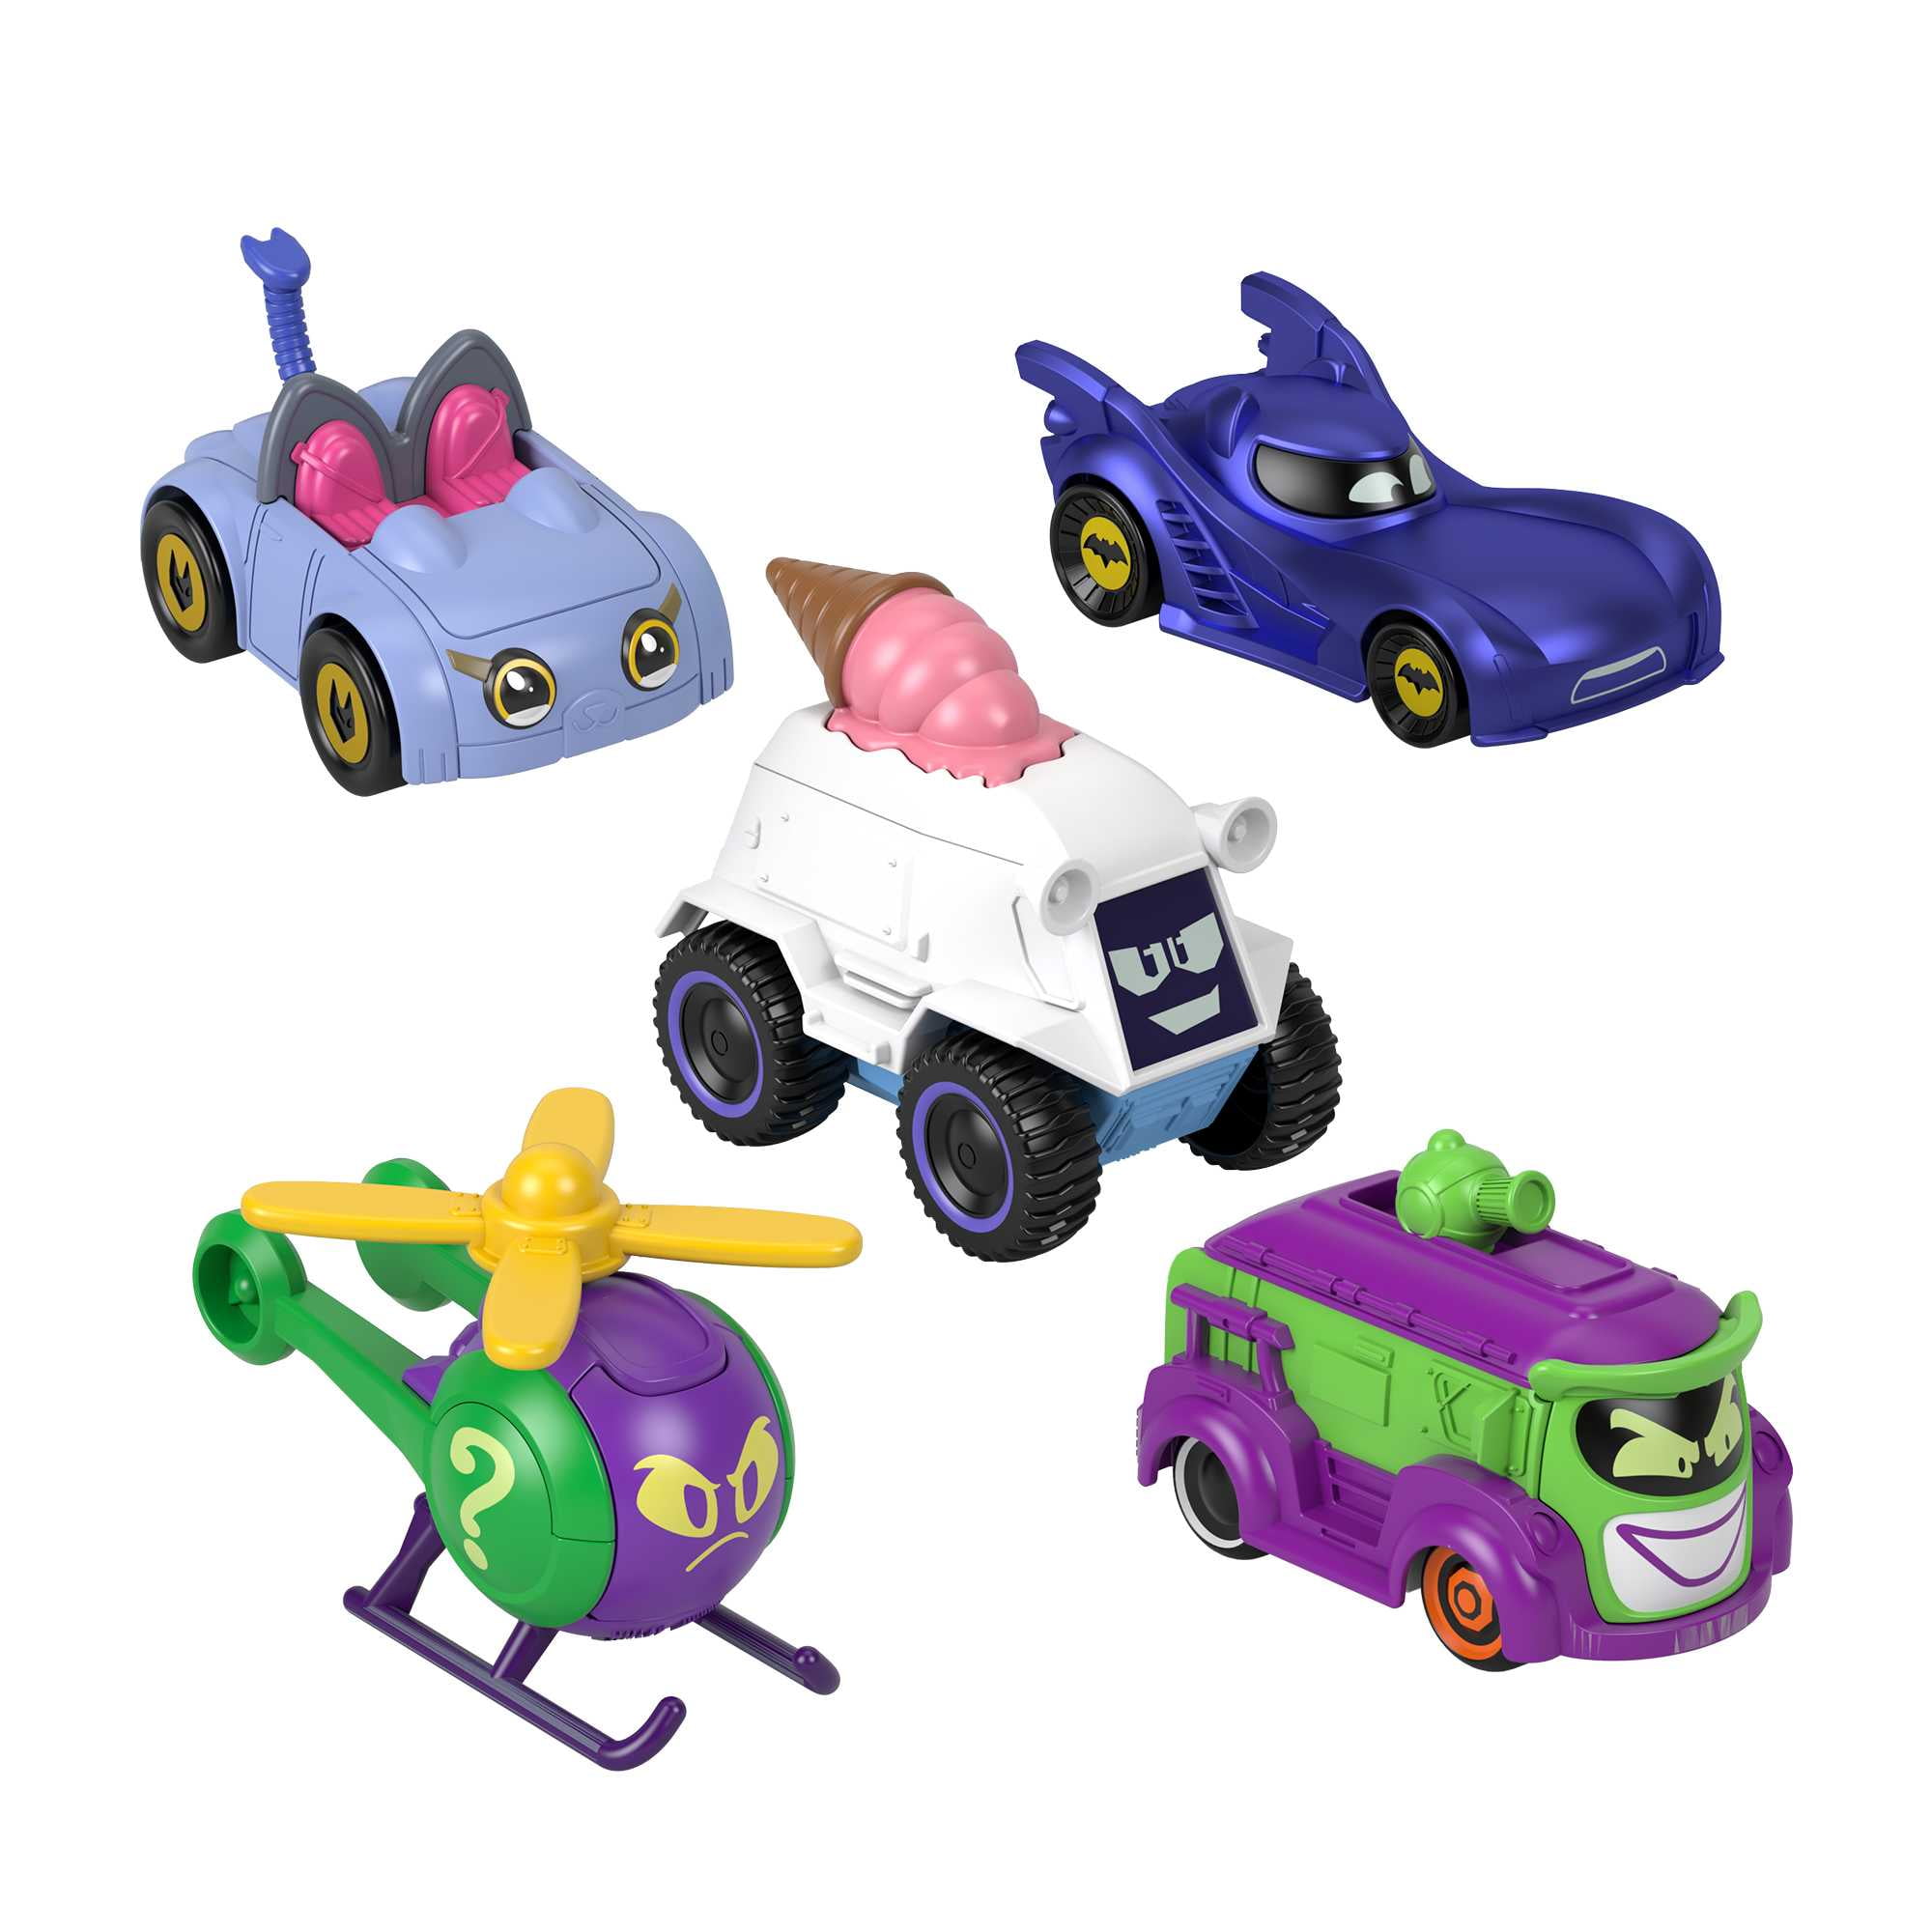  Fisher-Price DC Batwheels Light-Up 1:55 Scale Toy Cars 2-Pack,  Redbird and Batwing, Preschool Pretend Play Ages 3+ Years : Toys & Games